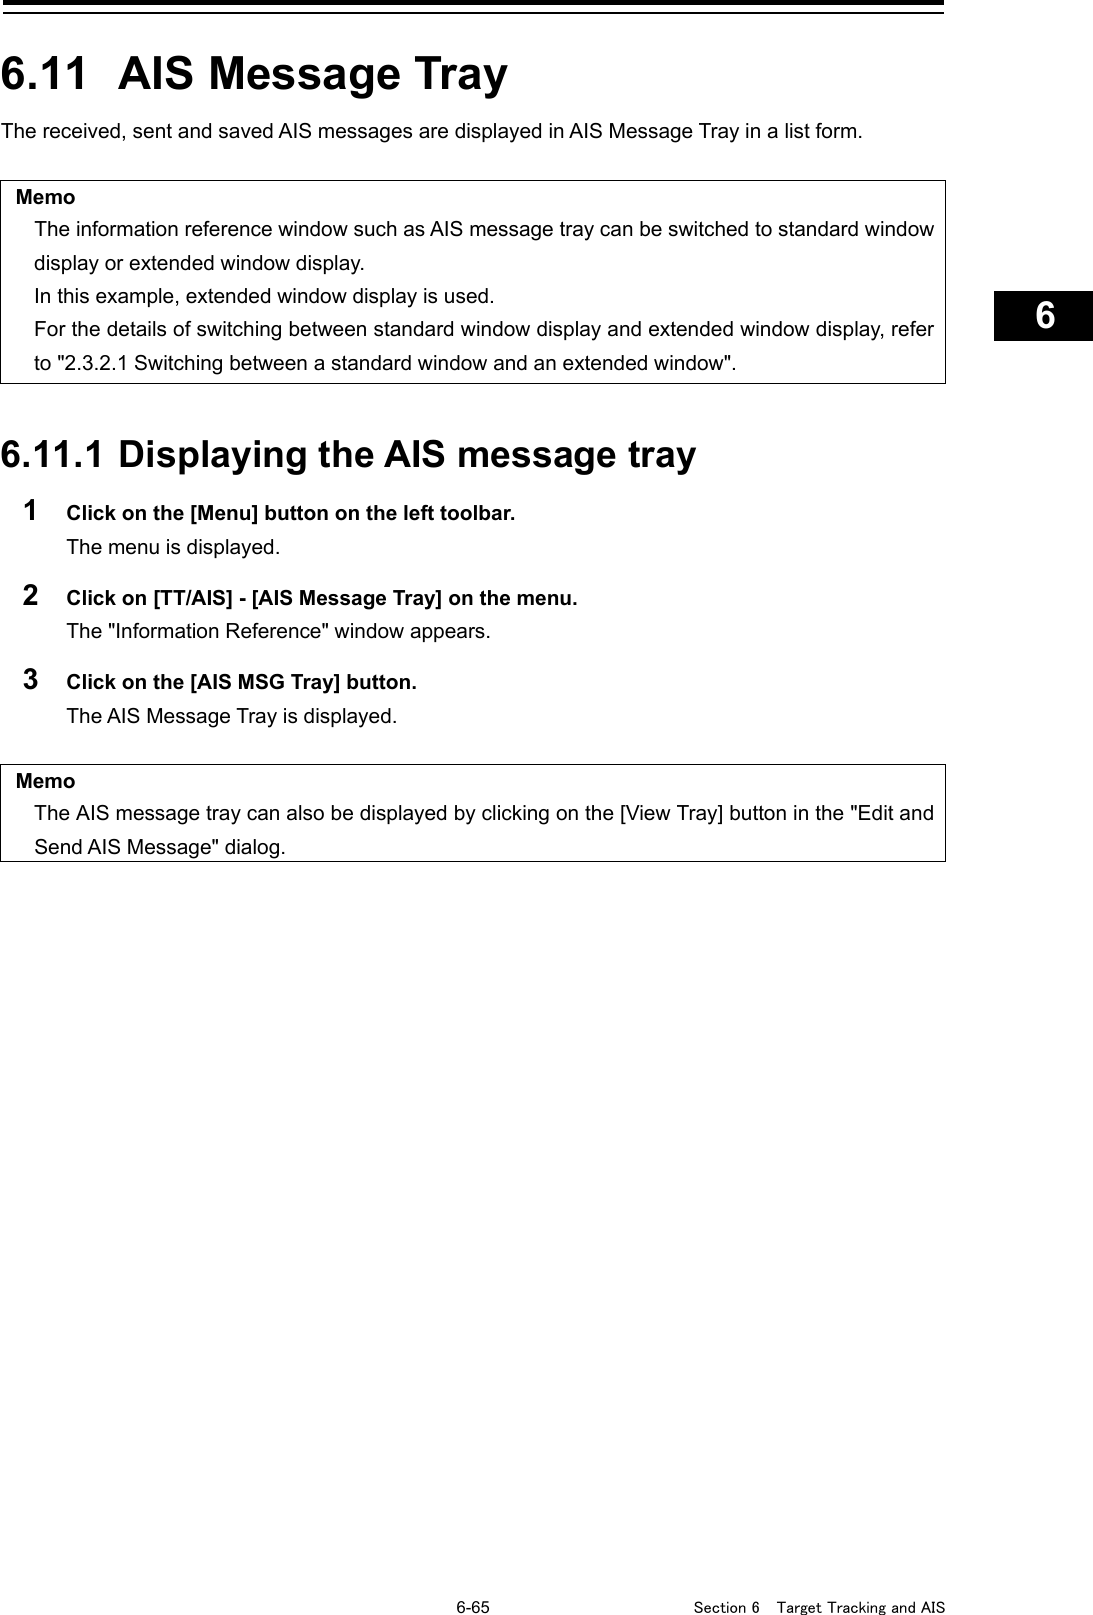   6-65  Section 6  Target Tracking and AIS    1  2  3  4  5  6  7  8  9  10  11  12  13  14  15  16  17  18  19  20  21  22  23  24  25  26  27      6.11  AIS Message Tray The received, sent and saved AIS messages are displayed in AIS Message Tray in a list form.  Memo The information reference window such as AIS message tray can be switched to standard window display or extended window display. In this example, extended window display is used. For the details of switching between standard window display and extended window display, refer to &quot;2.3.2.1 Switching between a standard window and an extended window&quot;.   6.11.1 Displaying the AIS message tray 1  Click on the [Menu] button on the left toolbar. The menu is displayed. 2  Click on [TT/AIS] - [AIS Message Tray] on the menu. The &quot;Information Reference&quot; window appears. 3  Click on the [AIS MSG Tray] button. The AIS Message Tray is displayed.  Memo The AIS message tray can also be displayed by clicking on the [View Tray] button in the &quot;Edit and Send AIS Message&quot; dialog.     